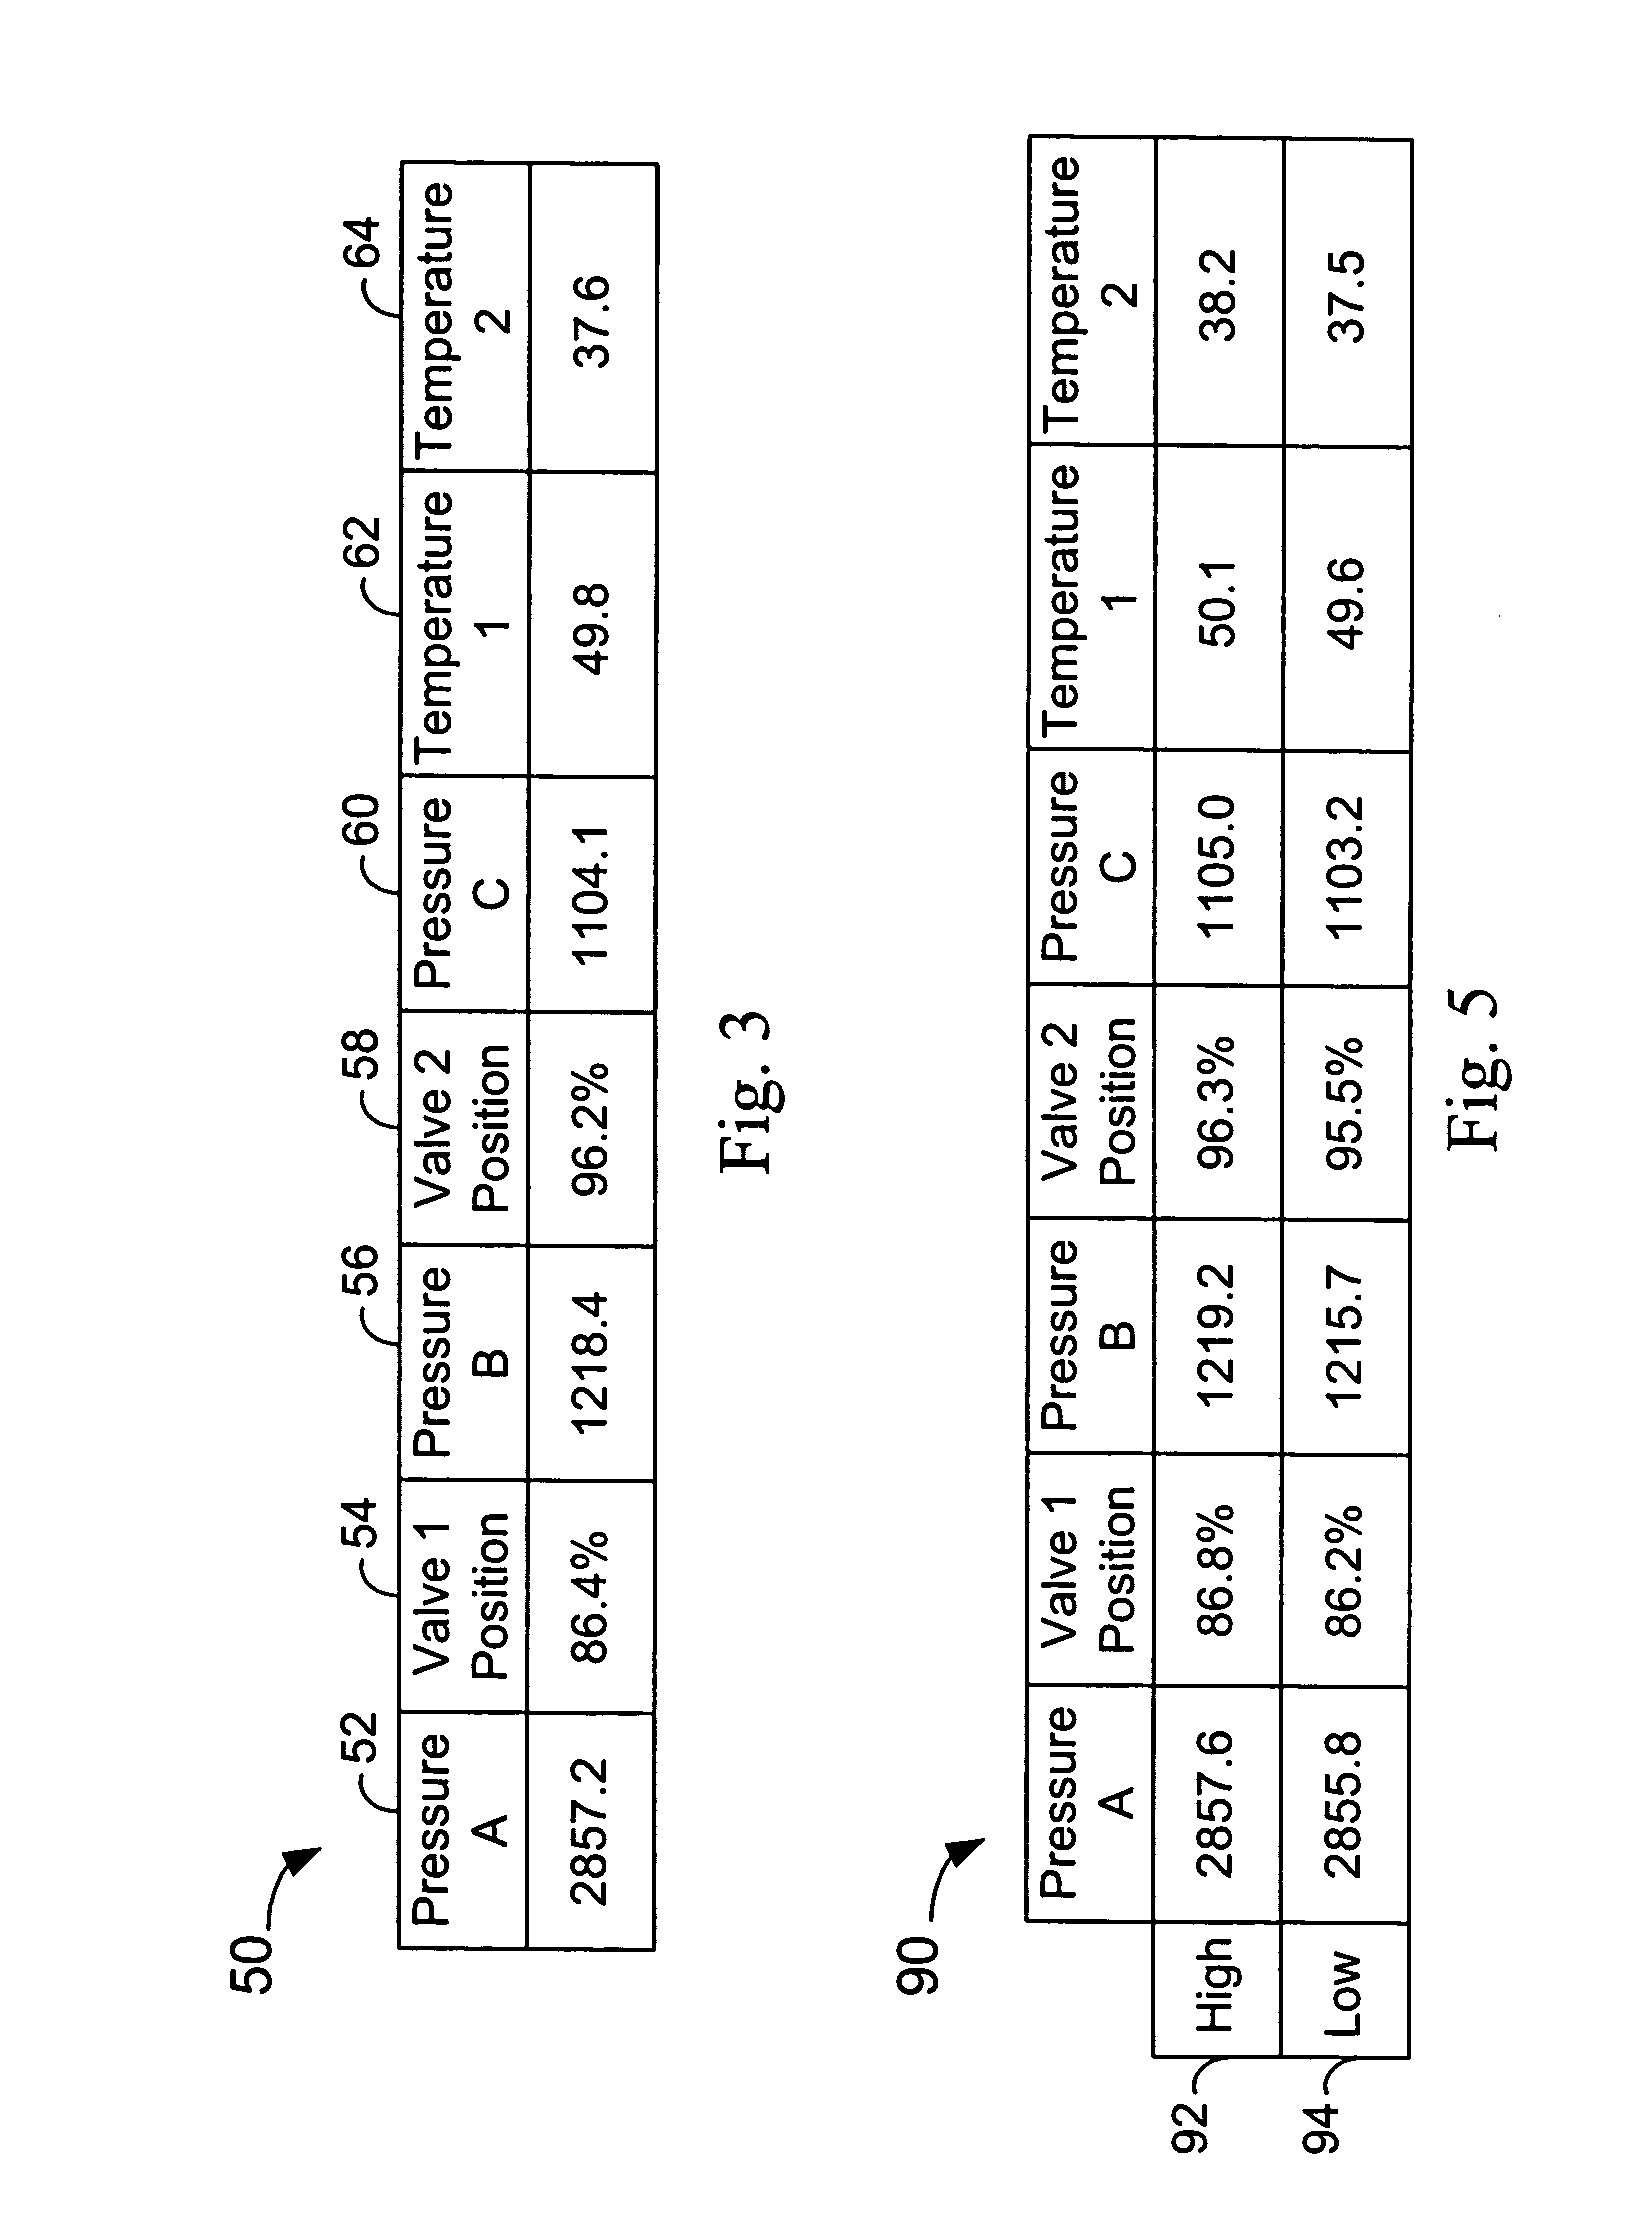 Inductive monitoring system constructed from nominal system data and its use in real-time system monitoring